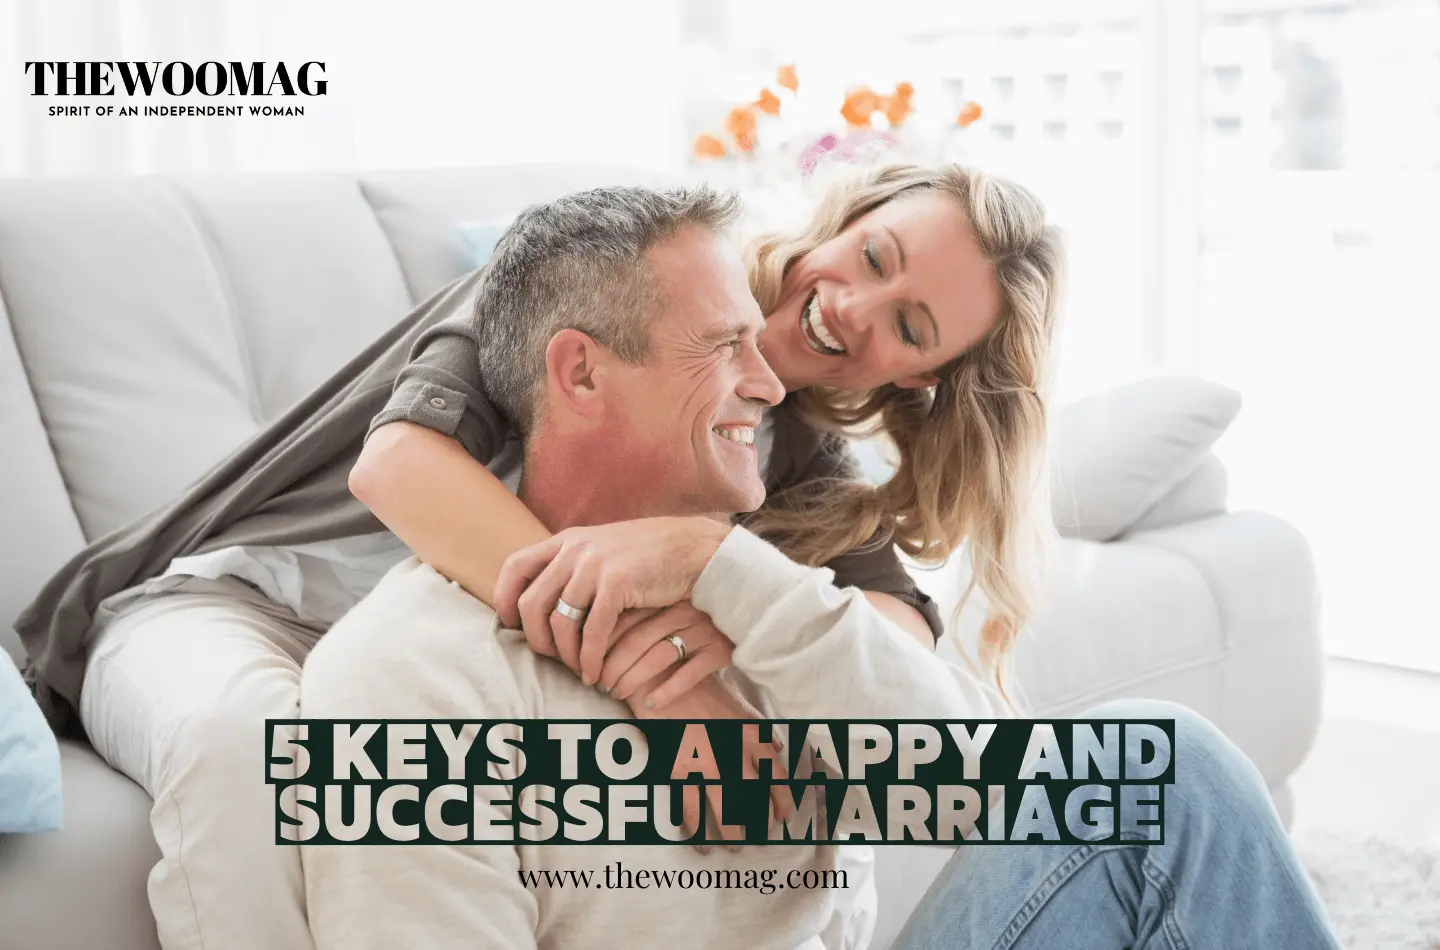 5 Keys To A Happy and Successful Marriage